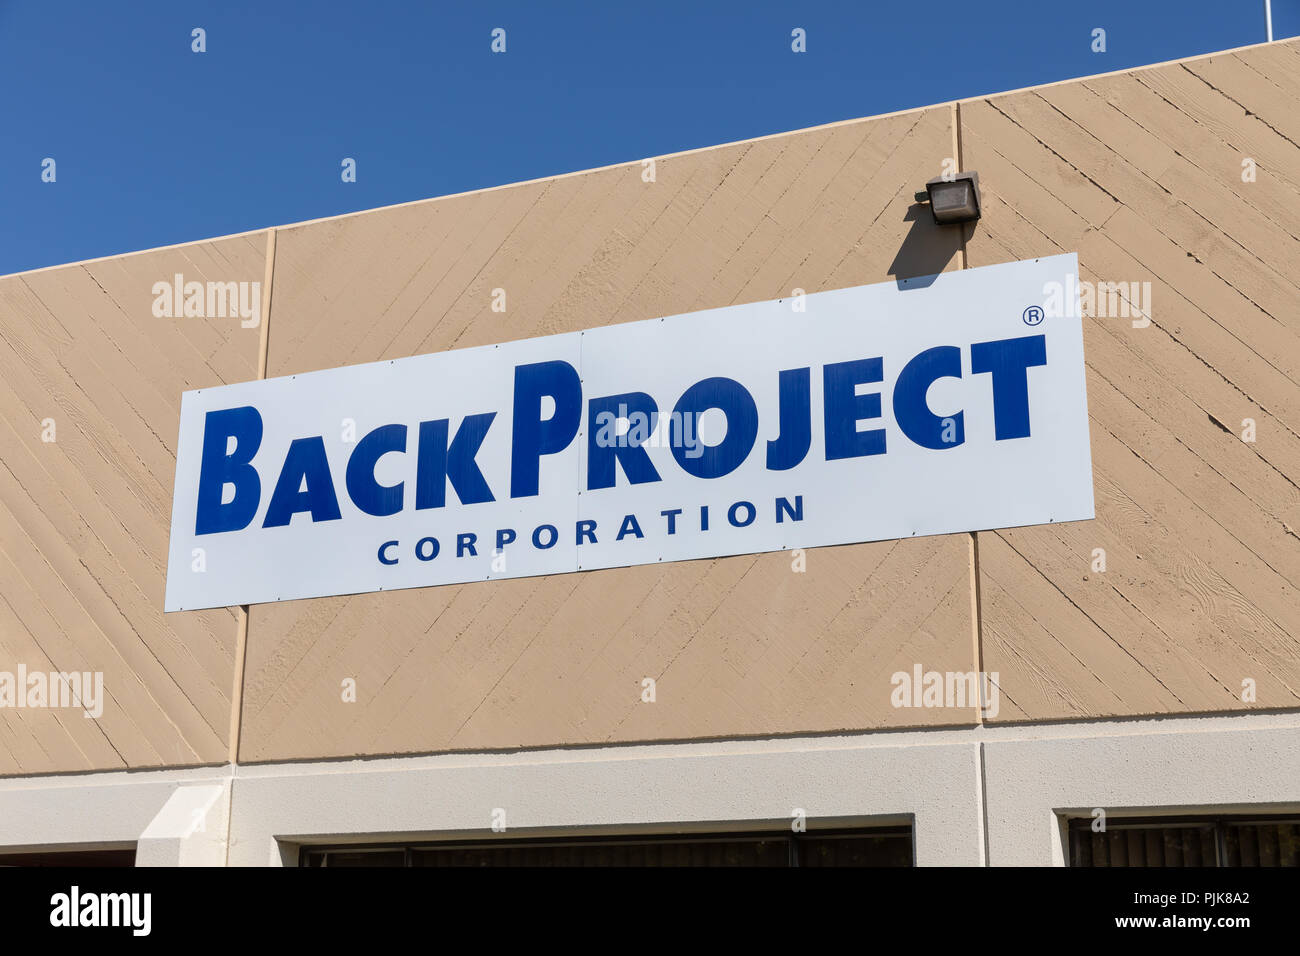 BackProject Corporation, sign on building, Sunnyvale, California Stock Photo